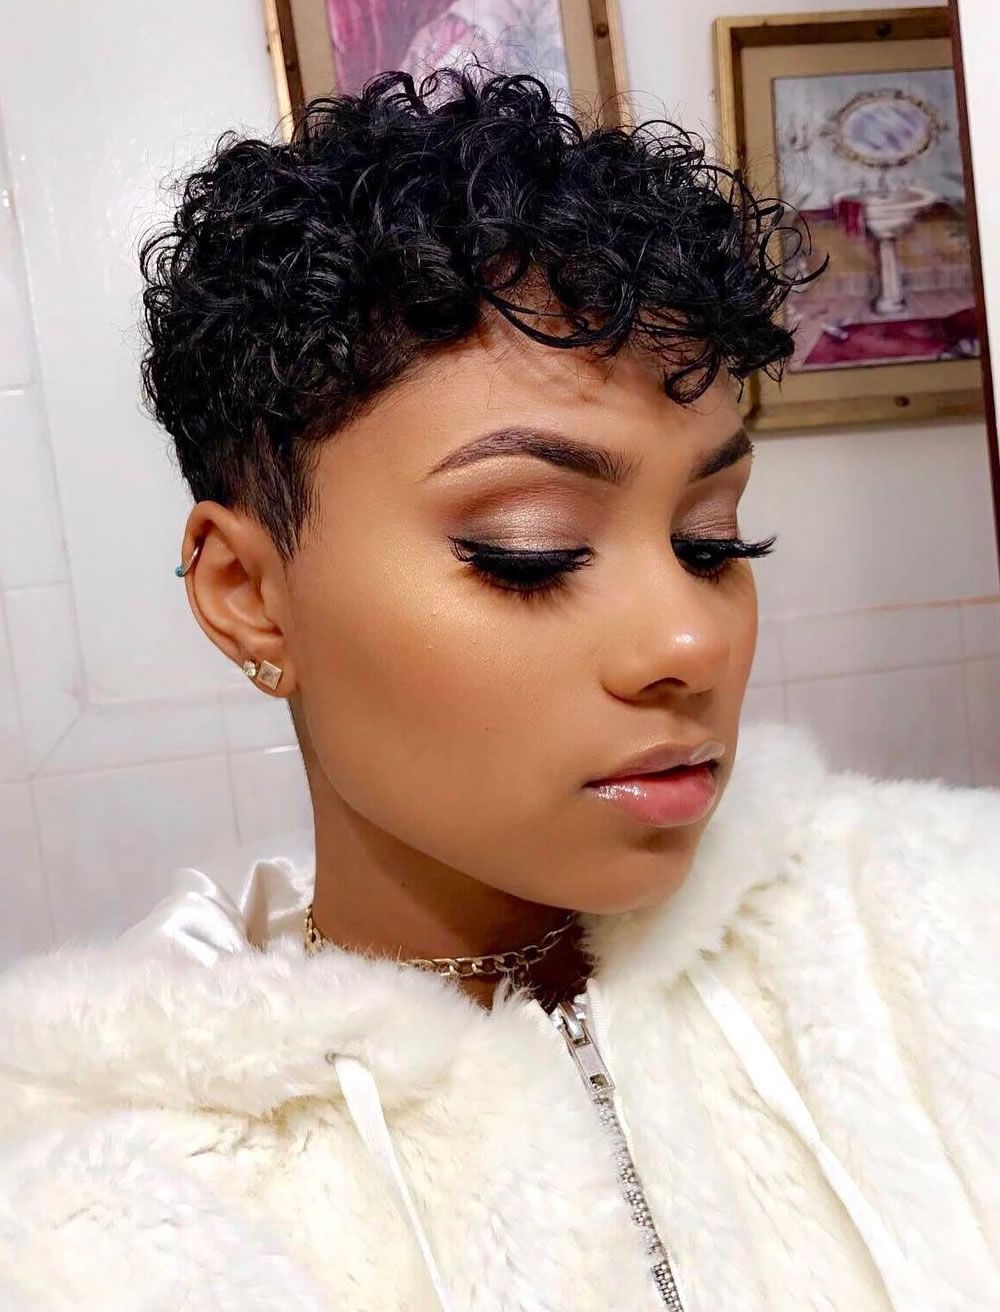 Curly Natural Short Hair Hairstyles For Black Women – Hairstyles With Regard To Curly Short Hairstyles Black Women (Photo 7 of 25)